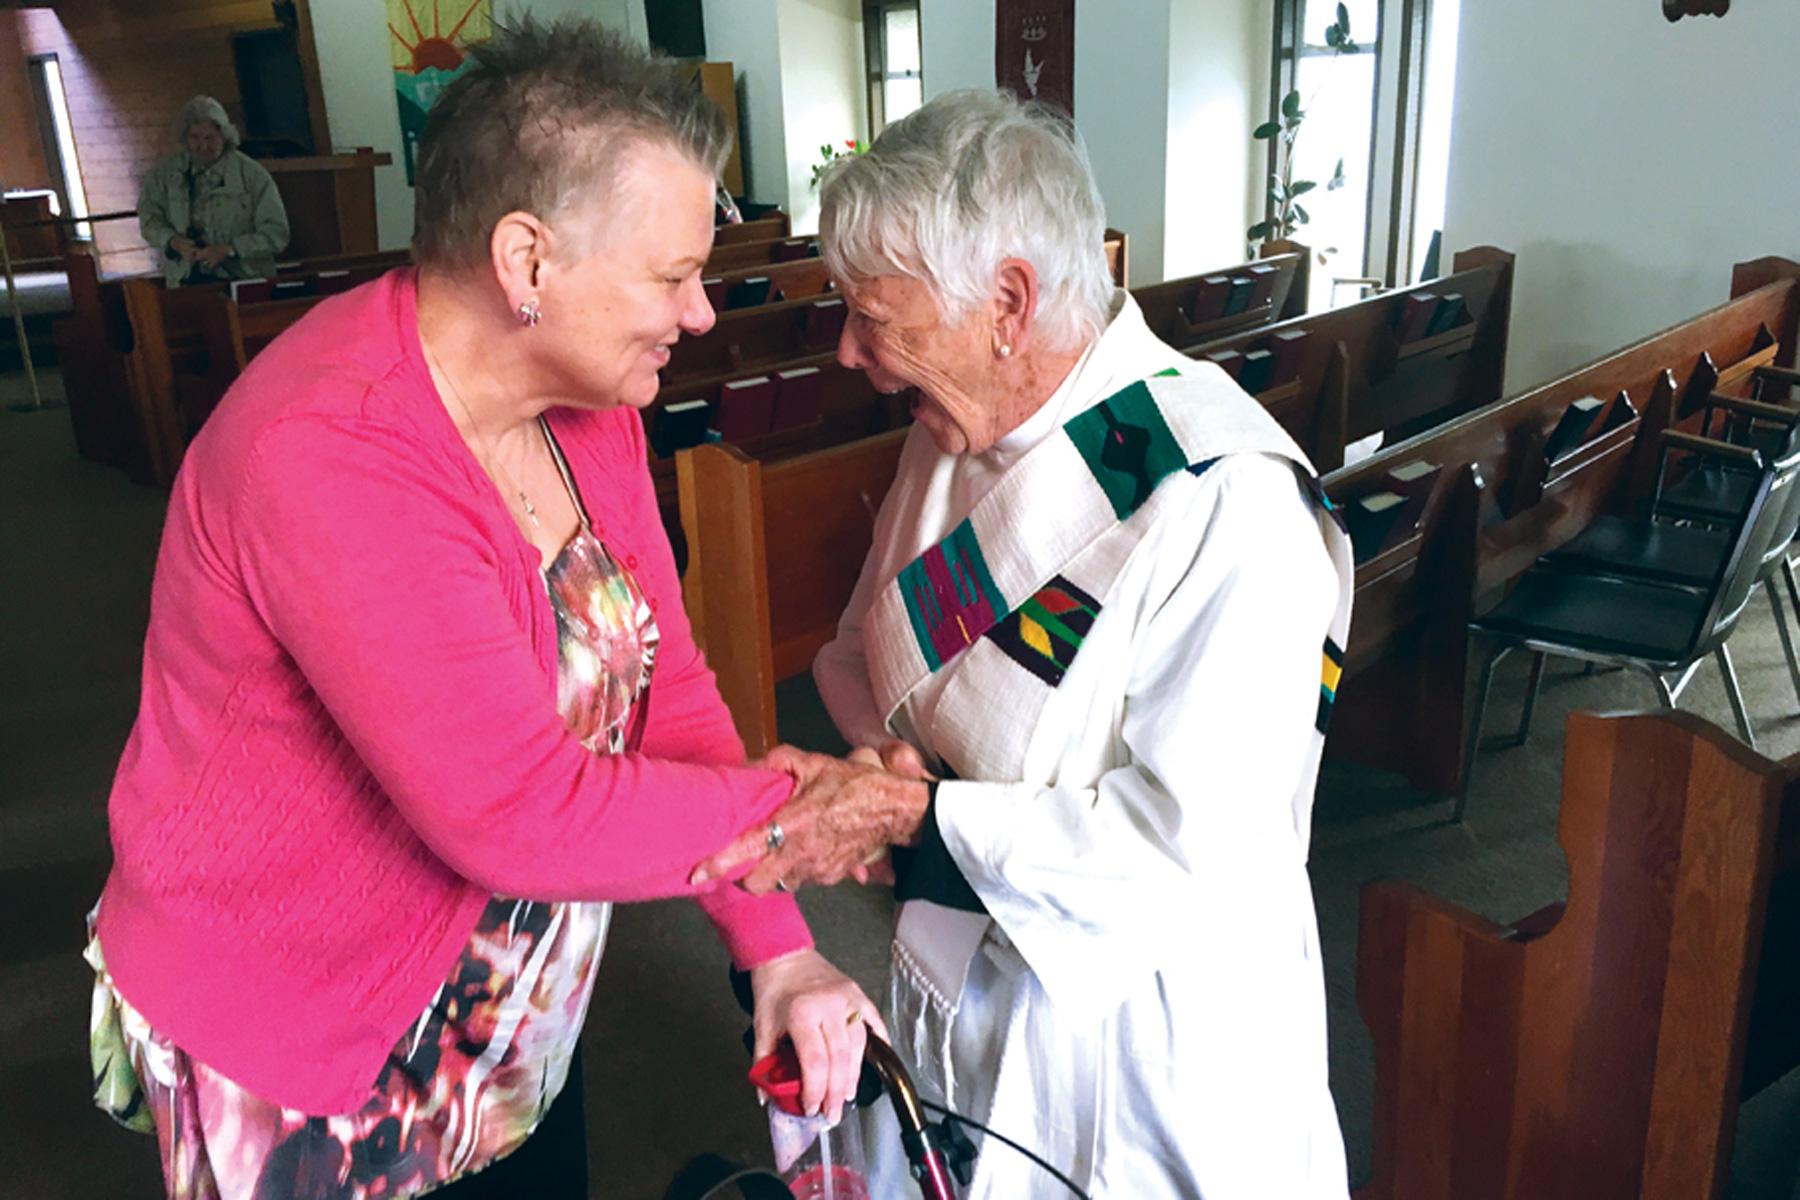 A minister greets a parishioner at the church at Faith, Province of British Columbia. Photo: Canada Lutheran